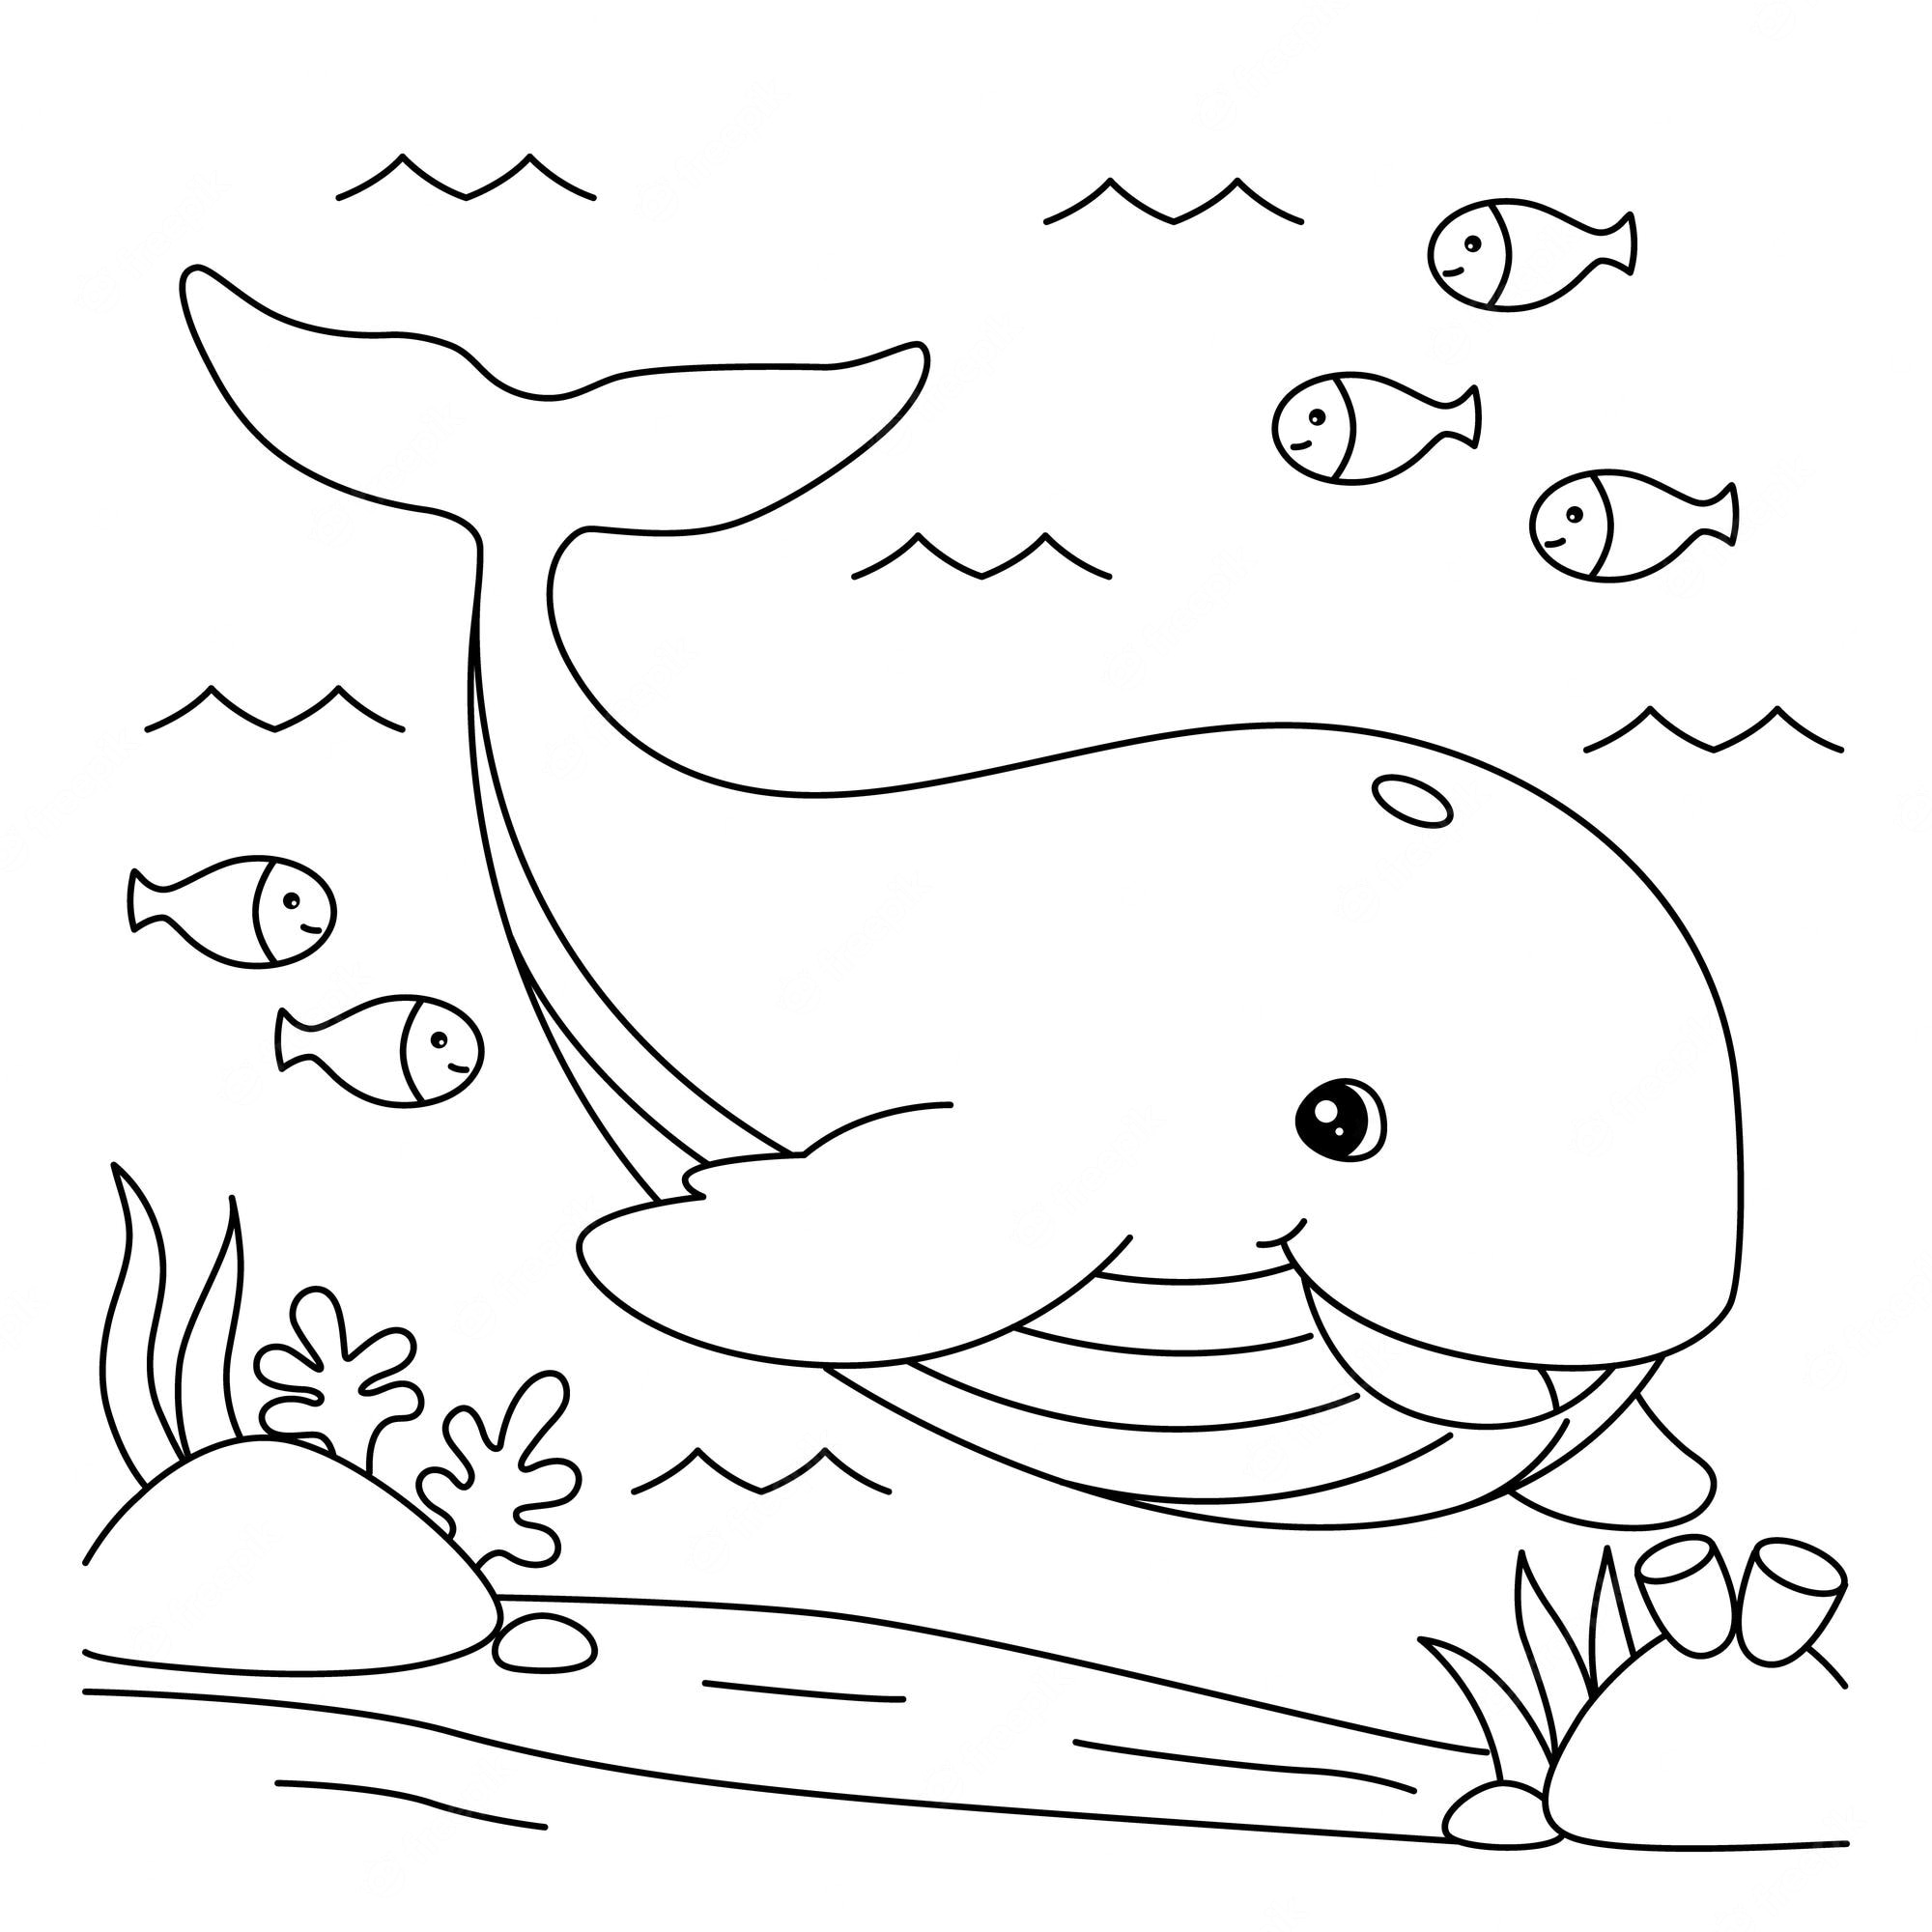 Whale coloring page isolated for kids - SheetalColor.com